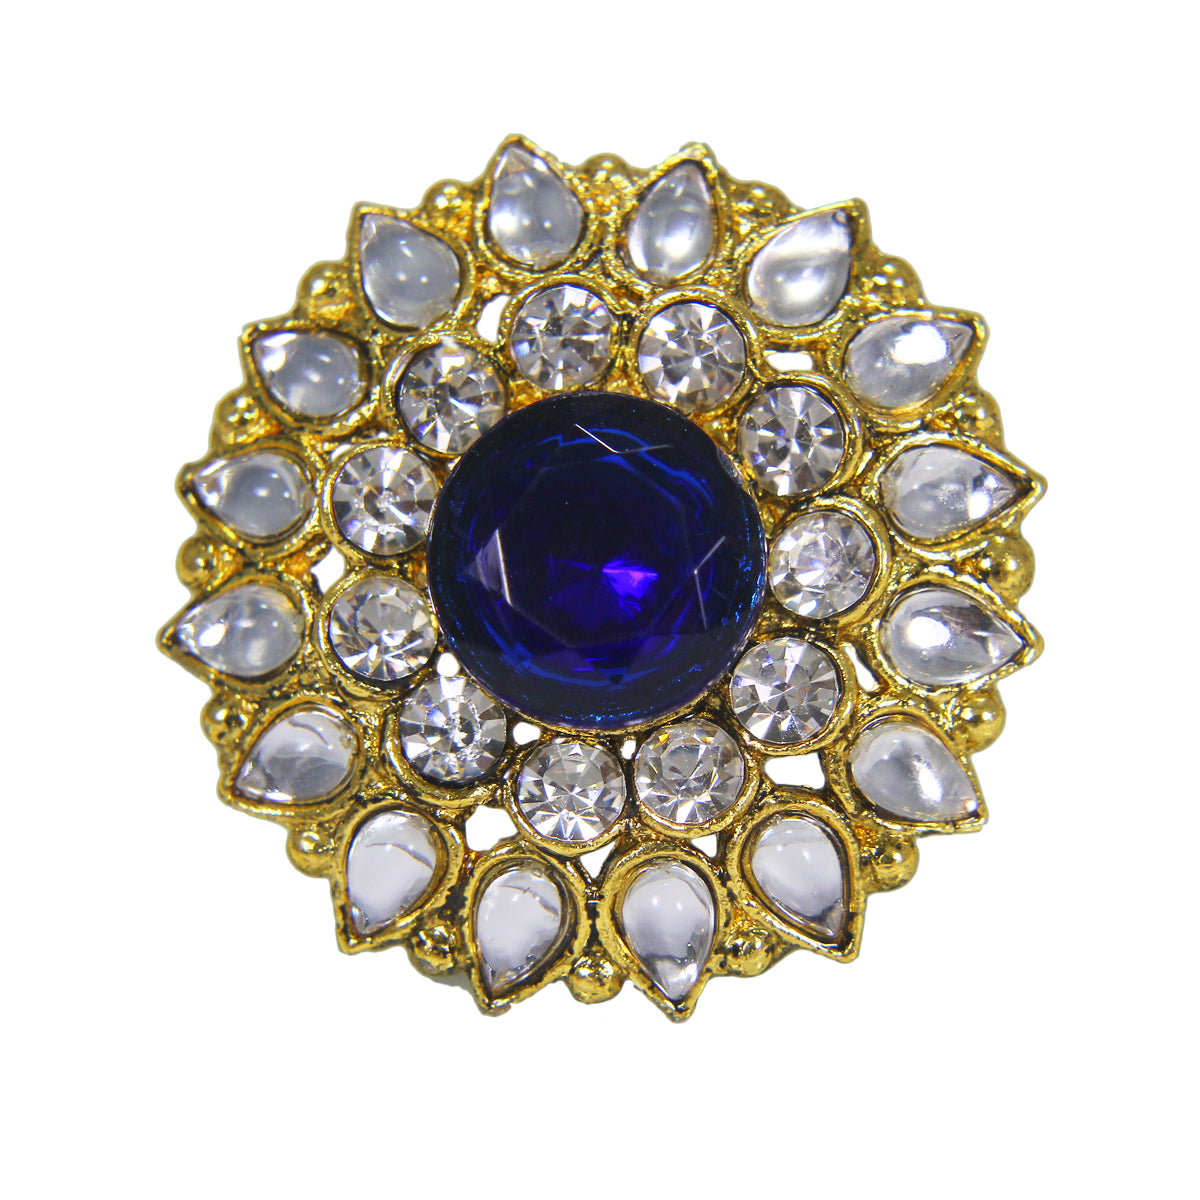 Abhinn Beautiful Royal Golden Plated Round Floral Design Ring with Blue White Crystal Stones